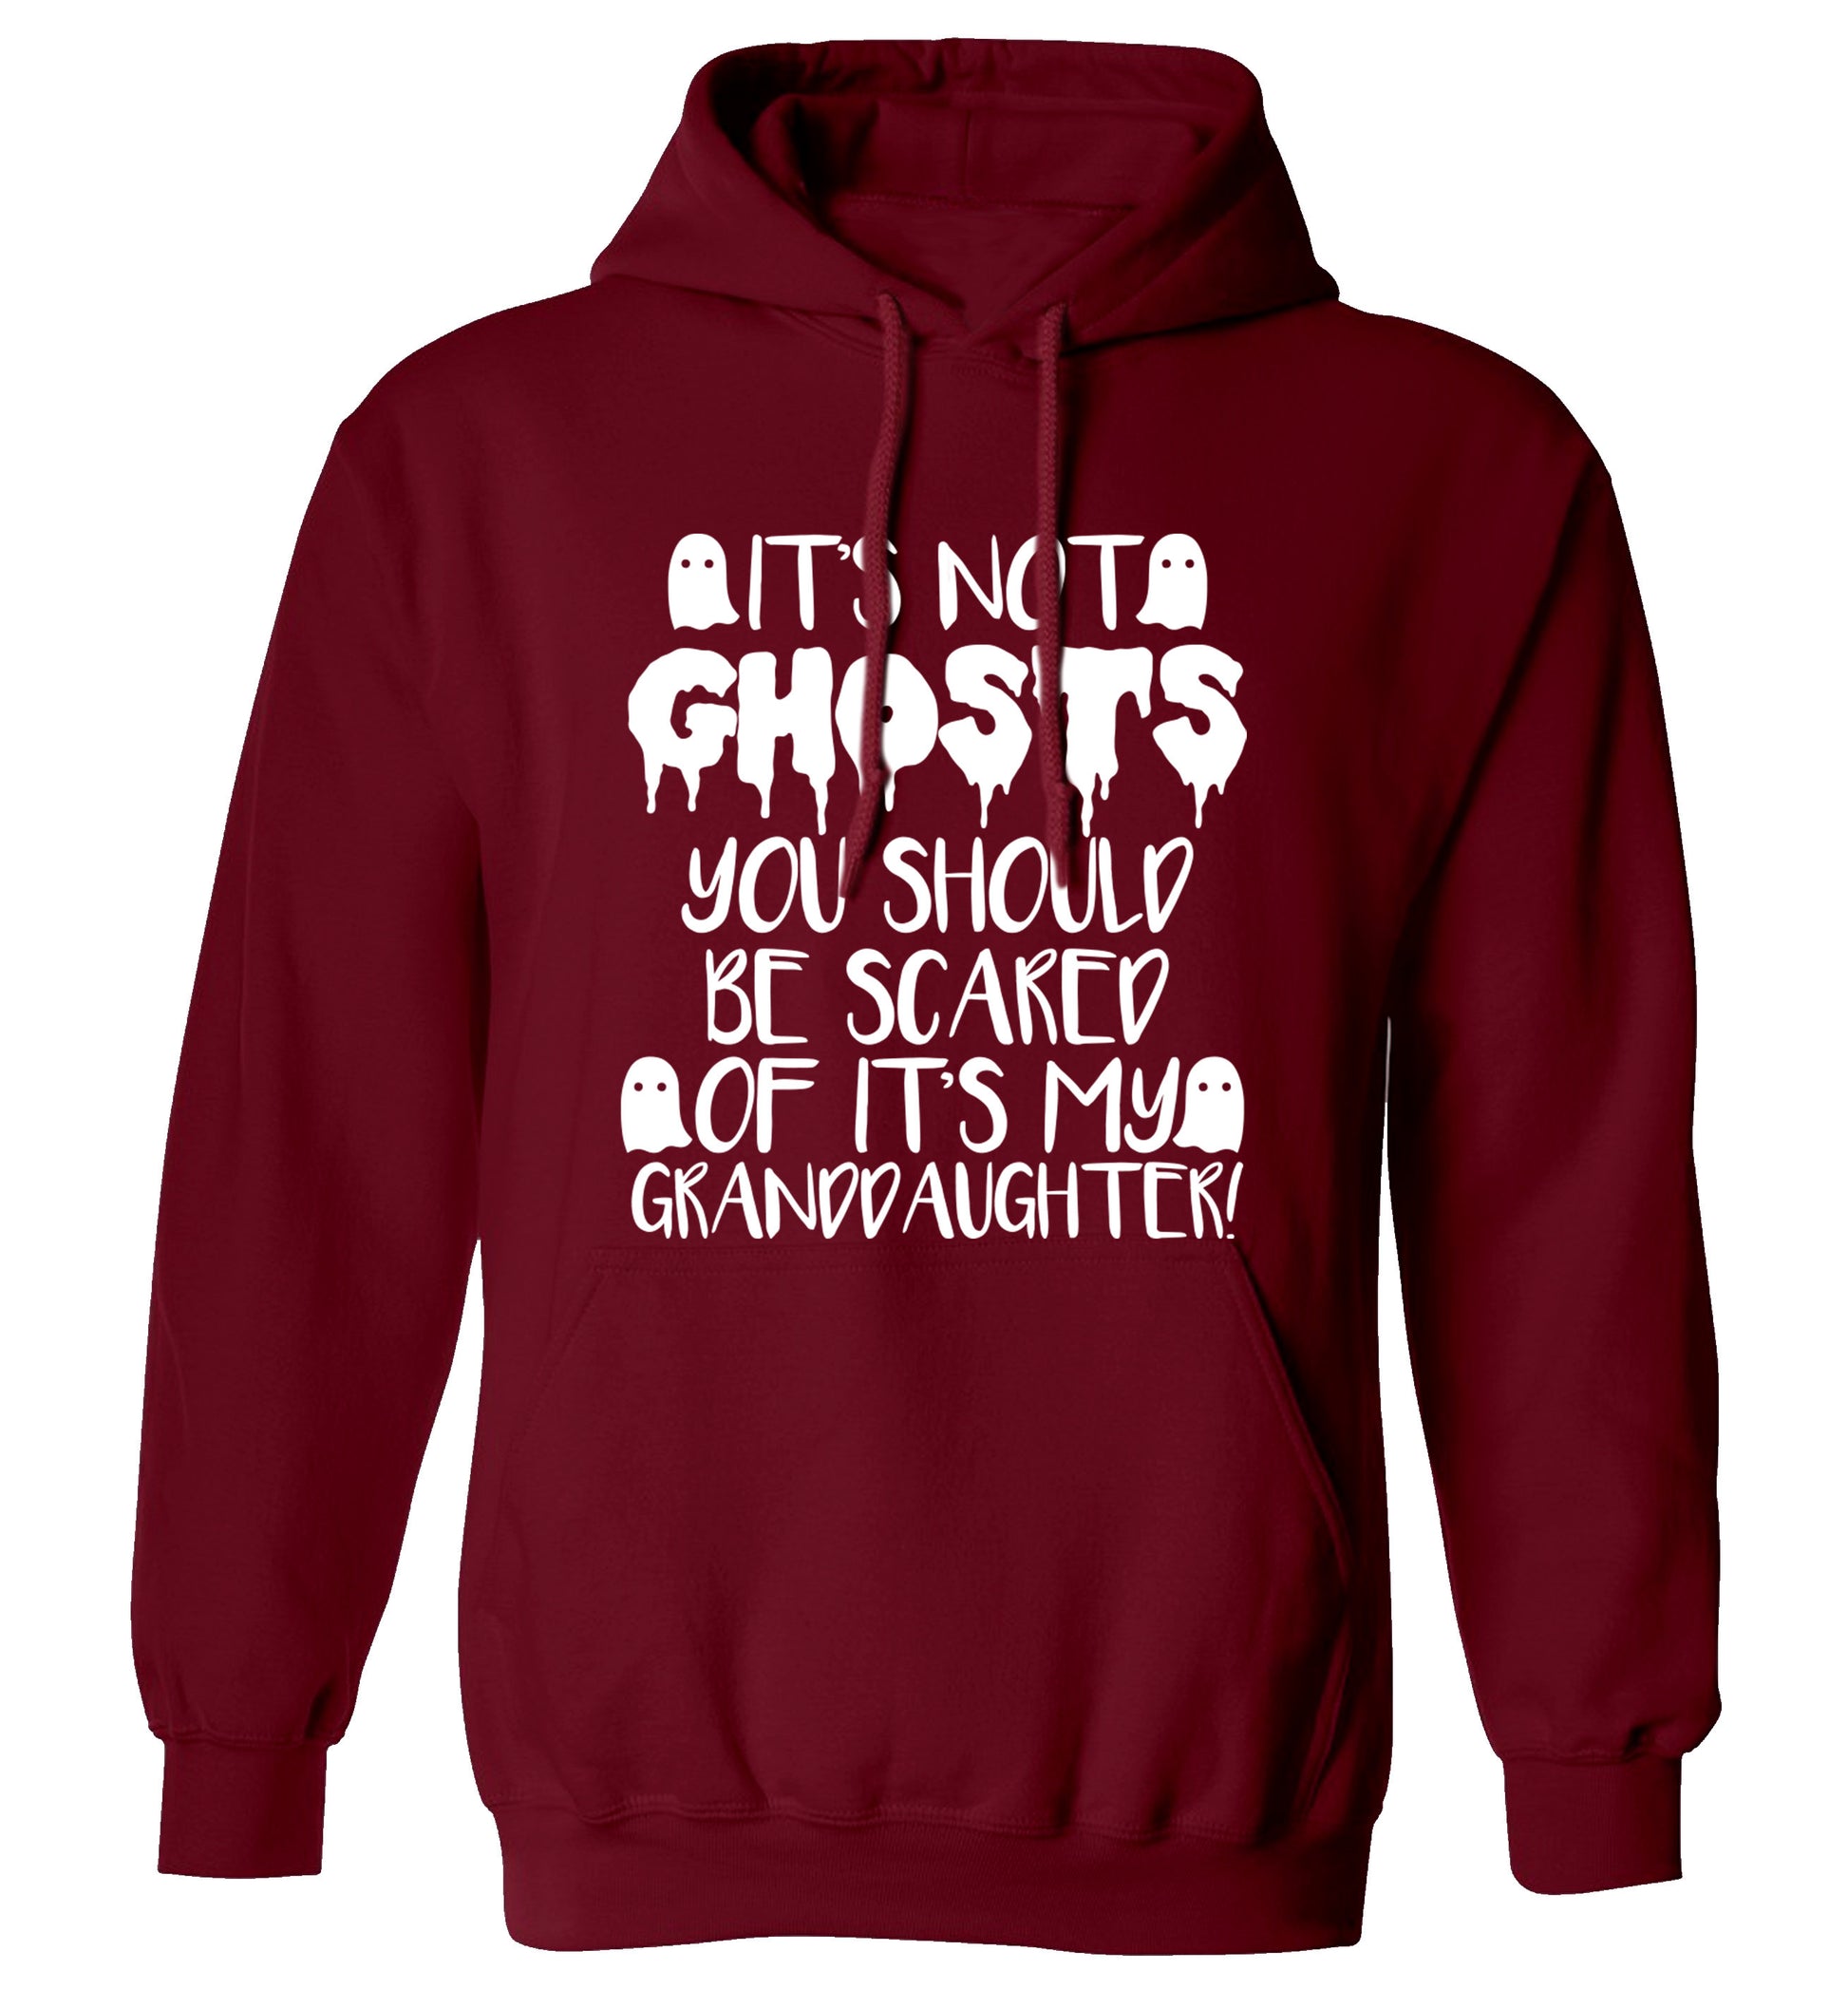 It's not ghosts you should be scared of it's my granddaughter! adults unisex maroon hoodie 2XL